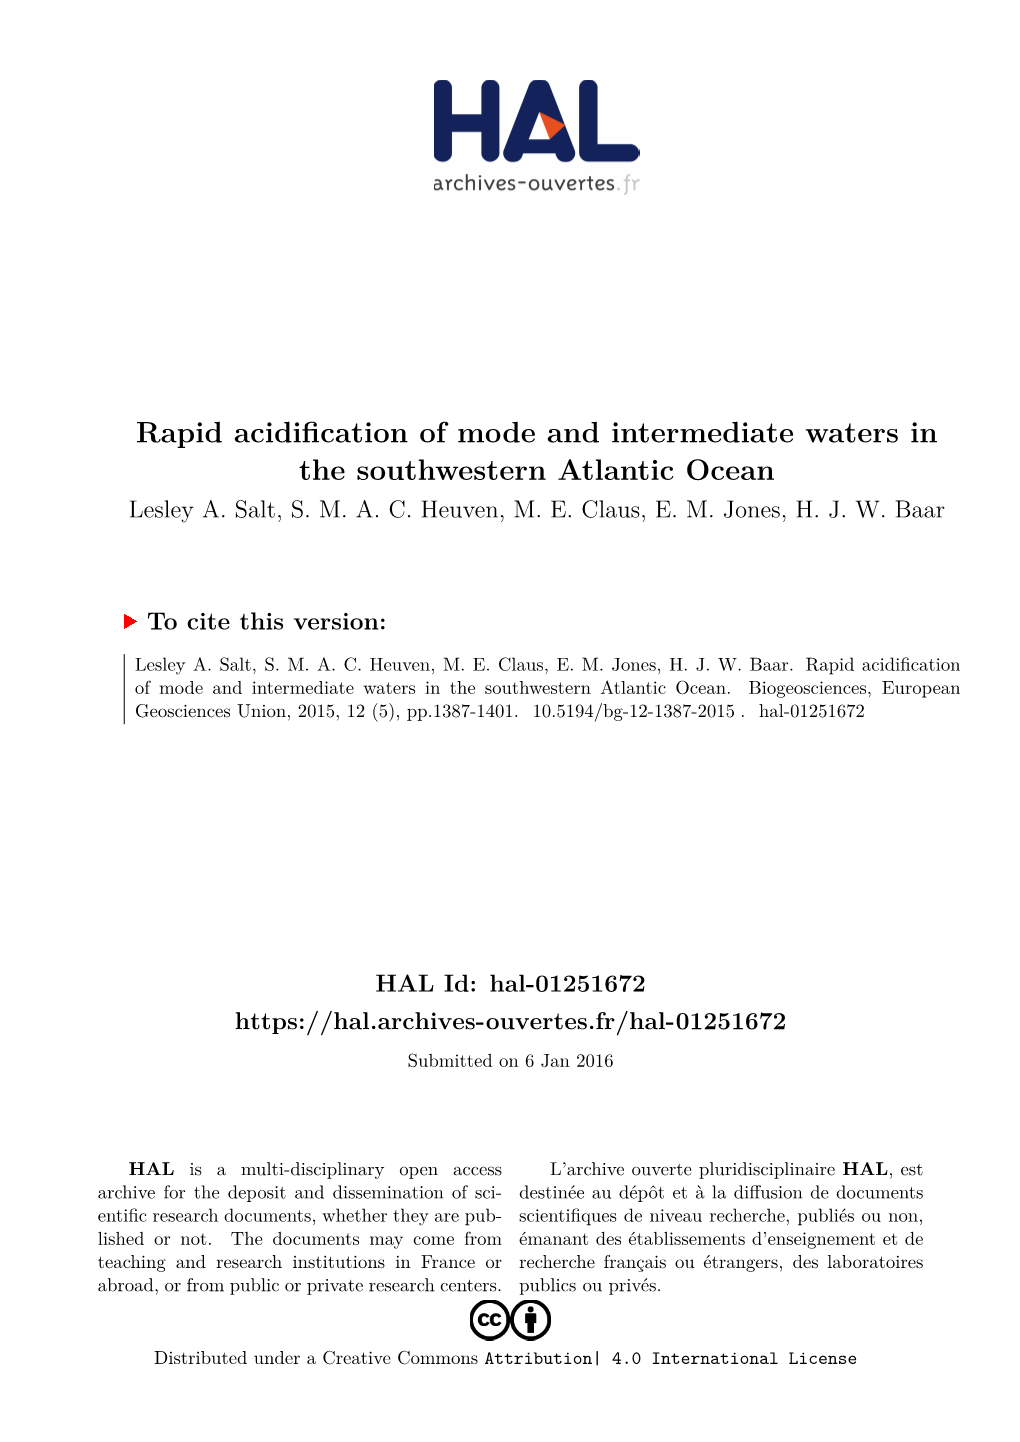 Rapid Acidification of Mode and Intermediate Waters in the Southwestern Atlantic Ocean Lesley A